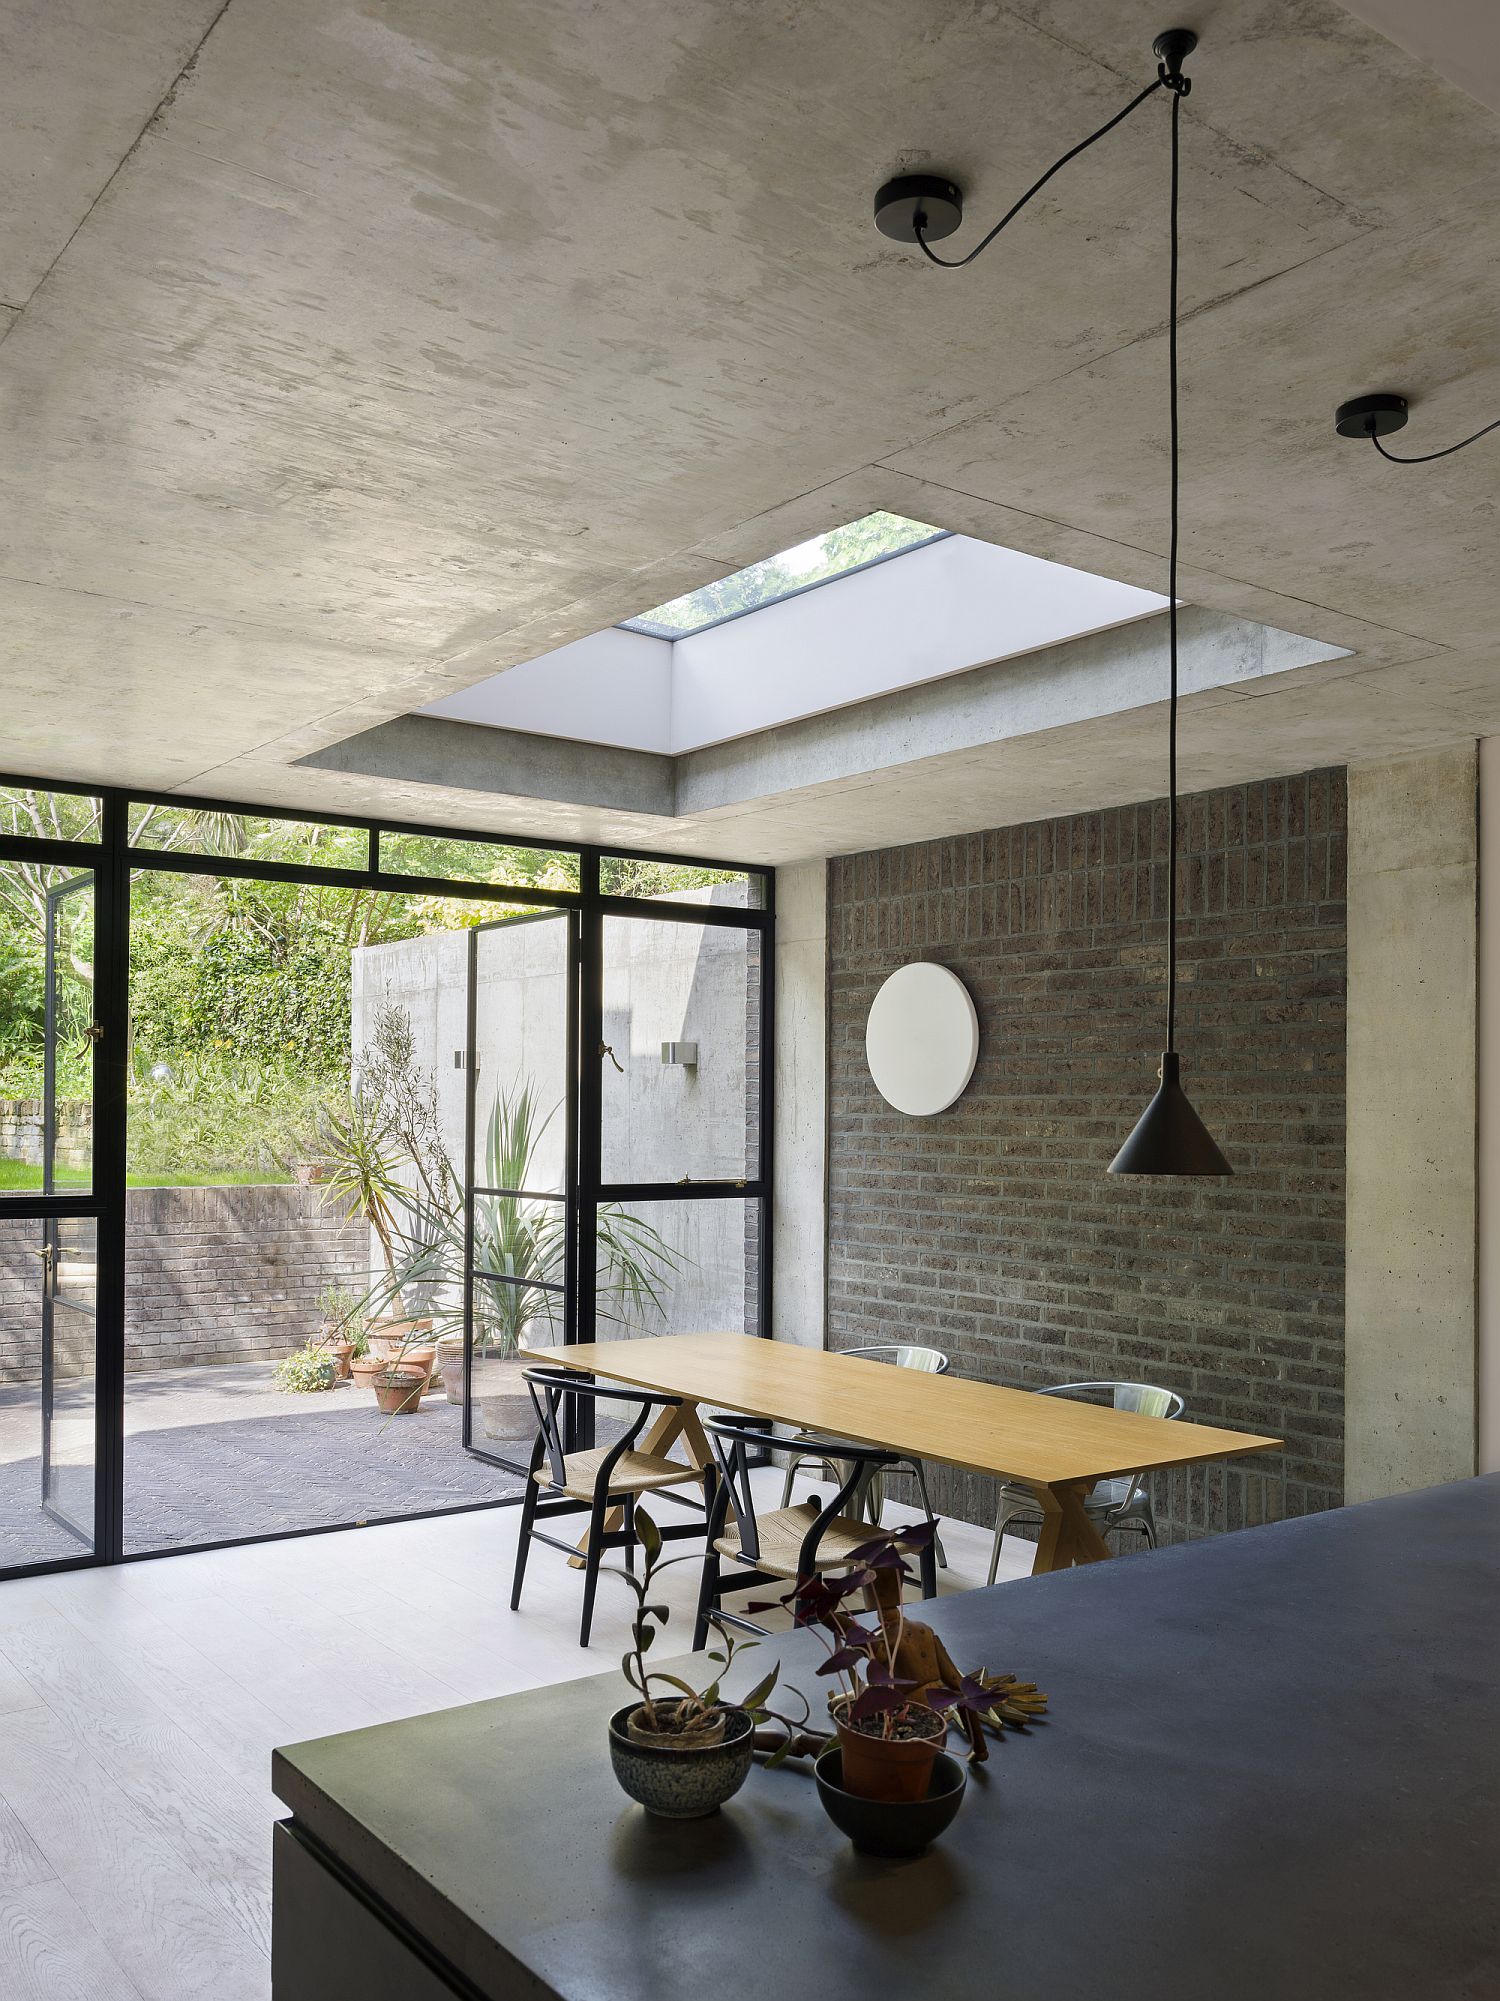 Concrete is used elegantly inside the kitchen area